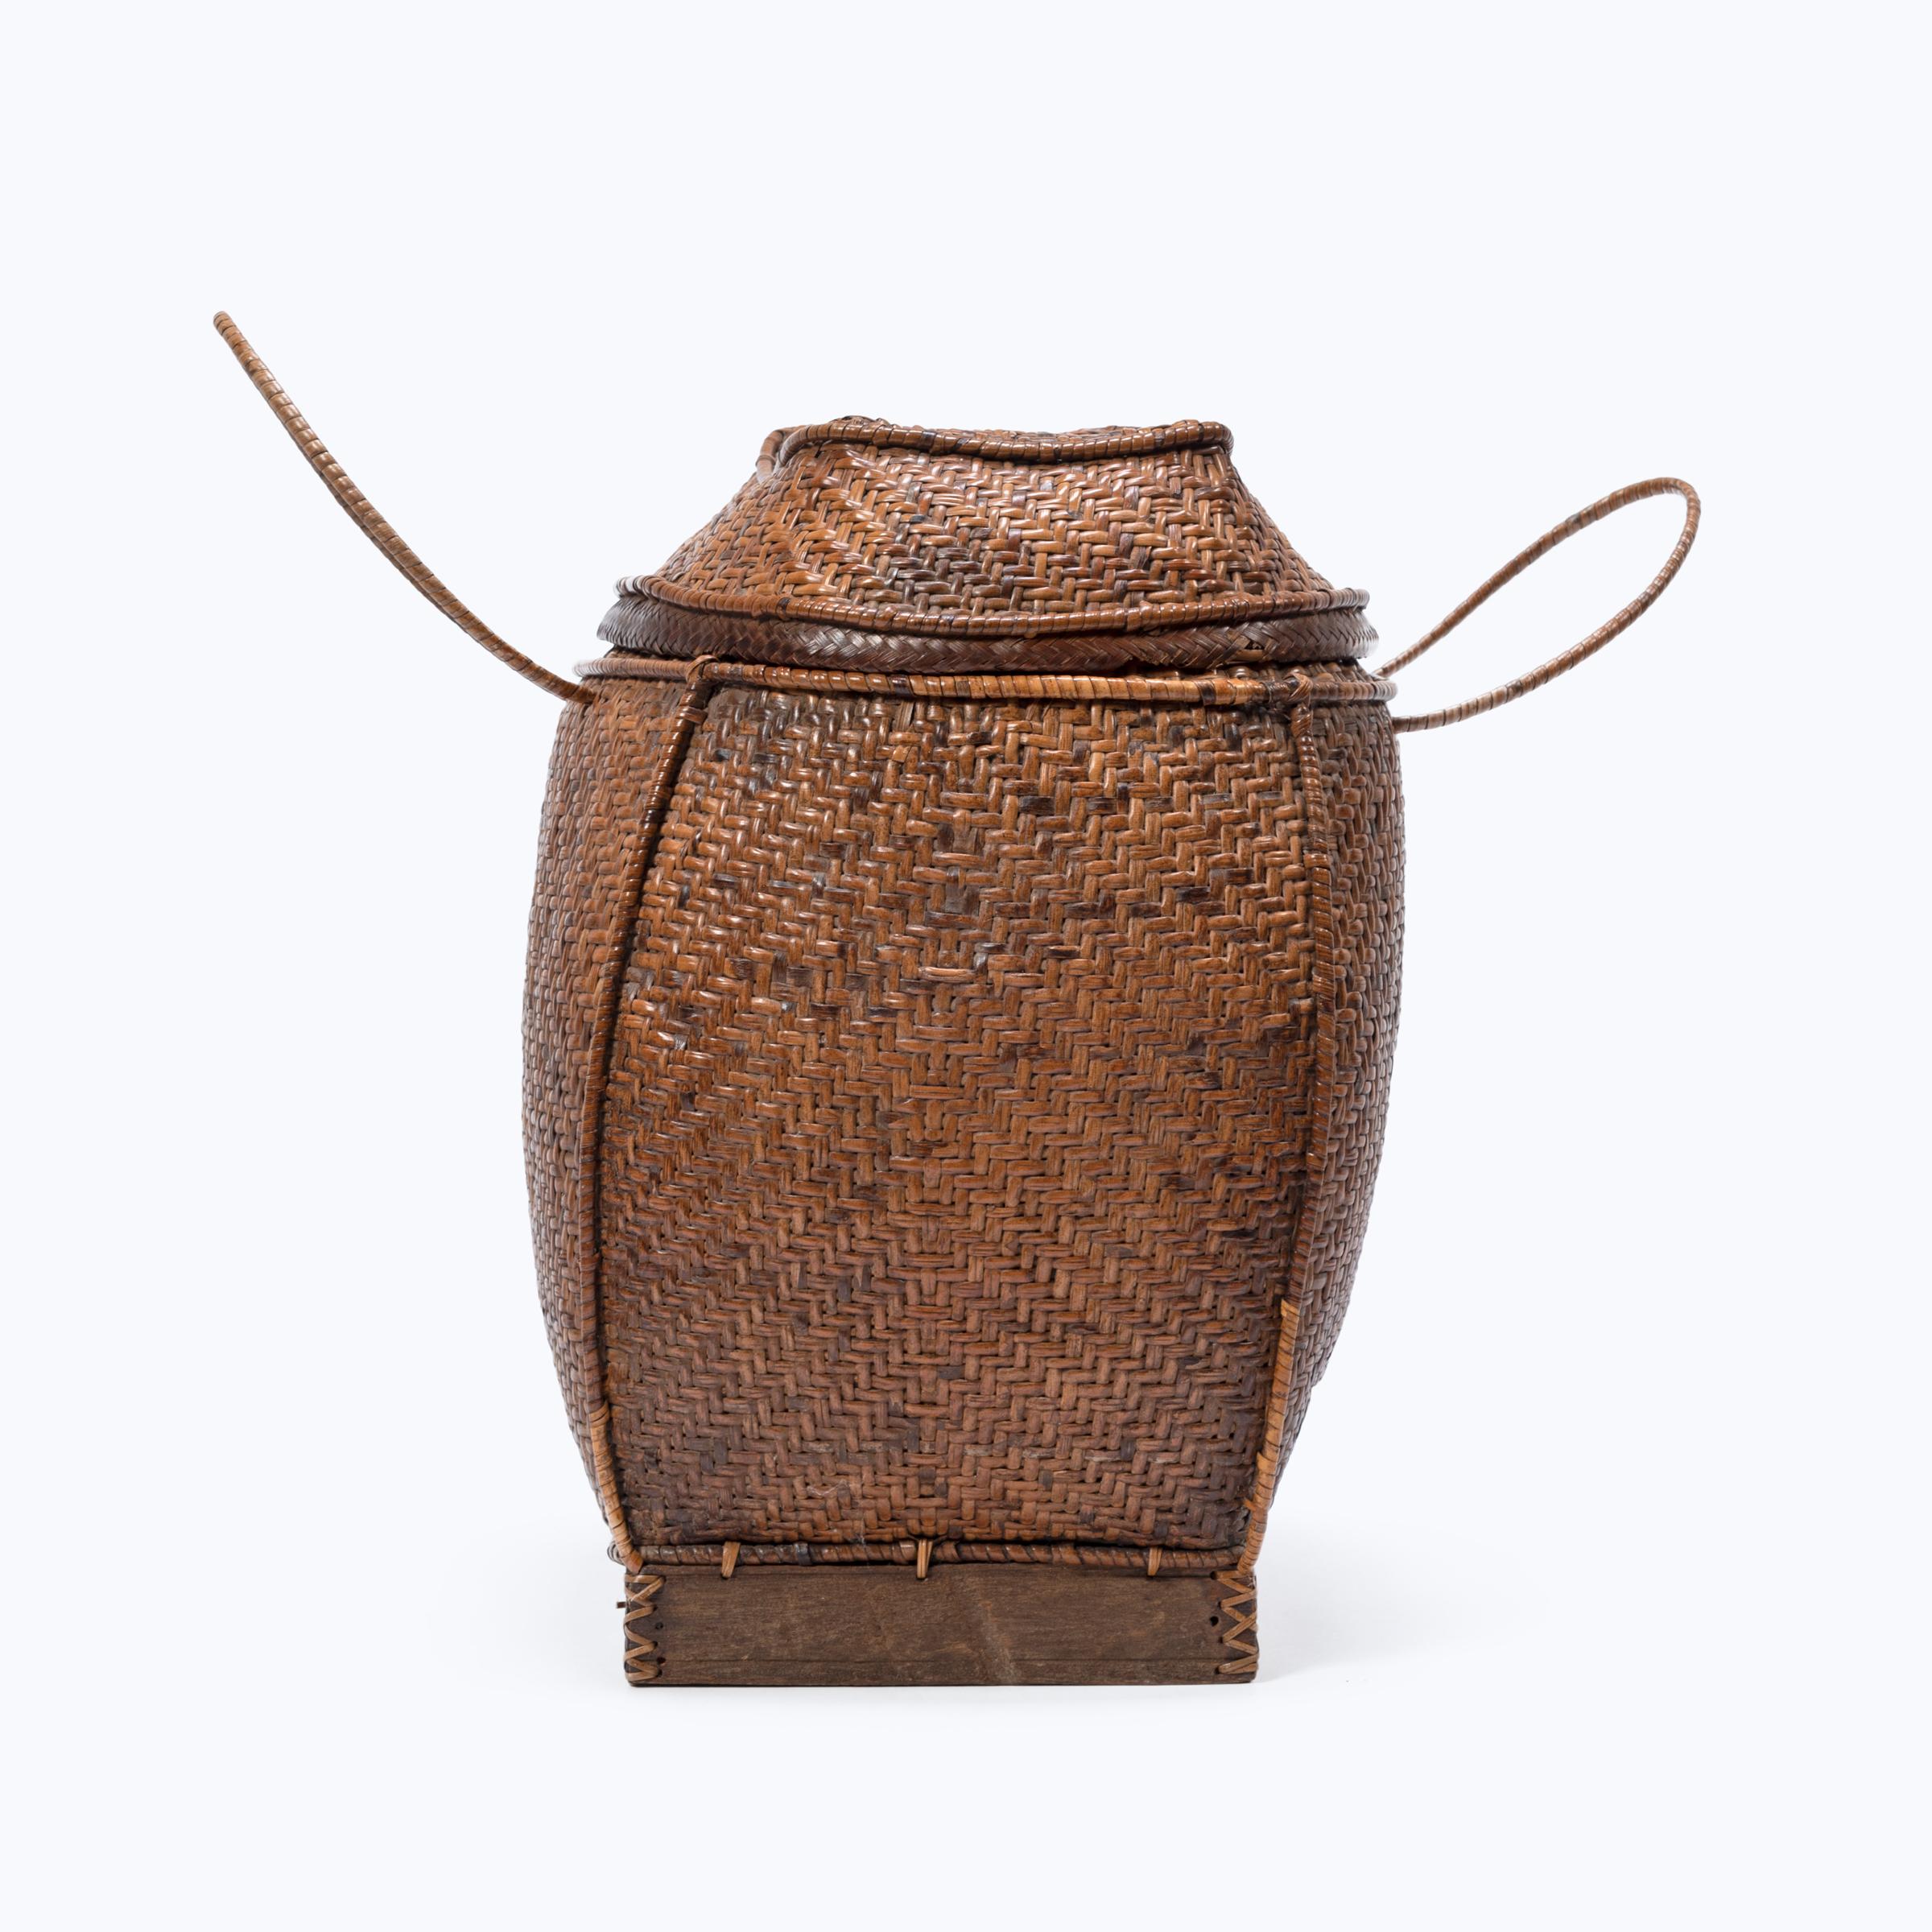 Basket making is an ancient and humble craft, but in the hands of a skilled weaver a simple reed basket can become a truly beautiful work of art. Handmade in the Philippines, this lidded basket with arched handles was once used for gathering